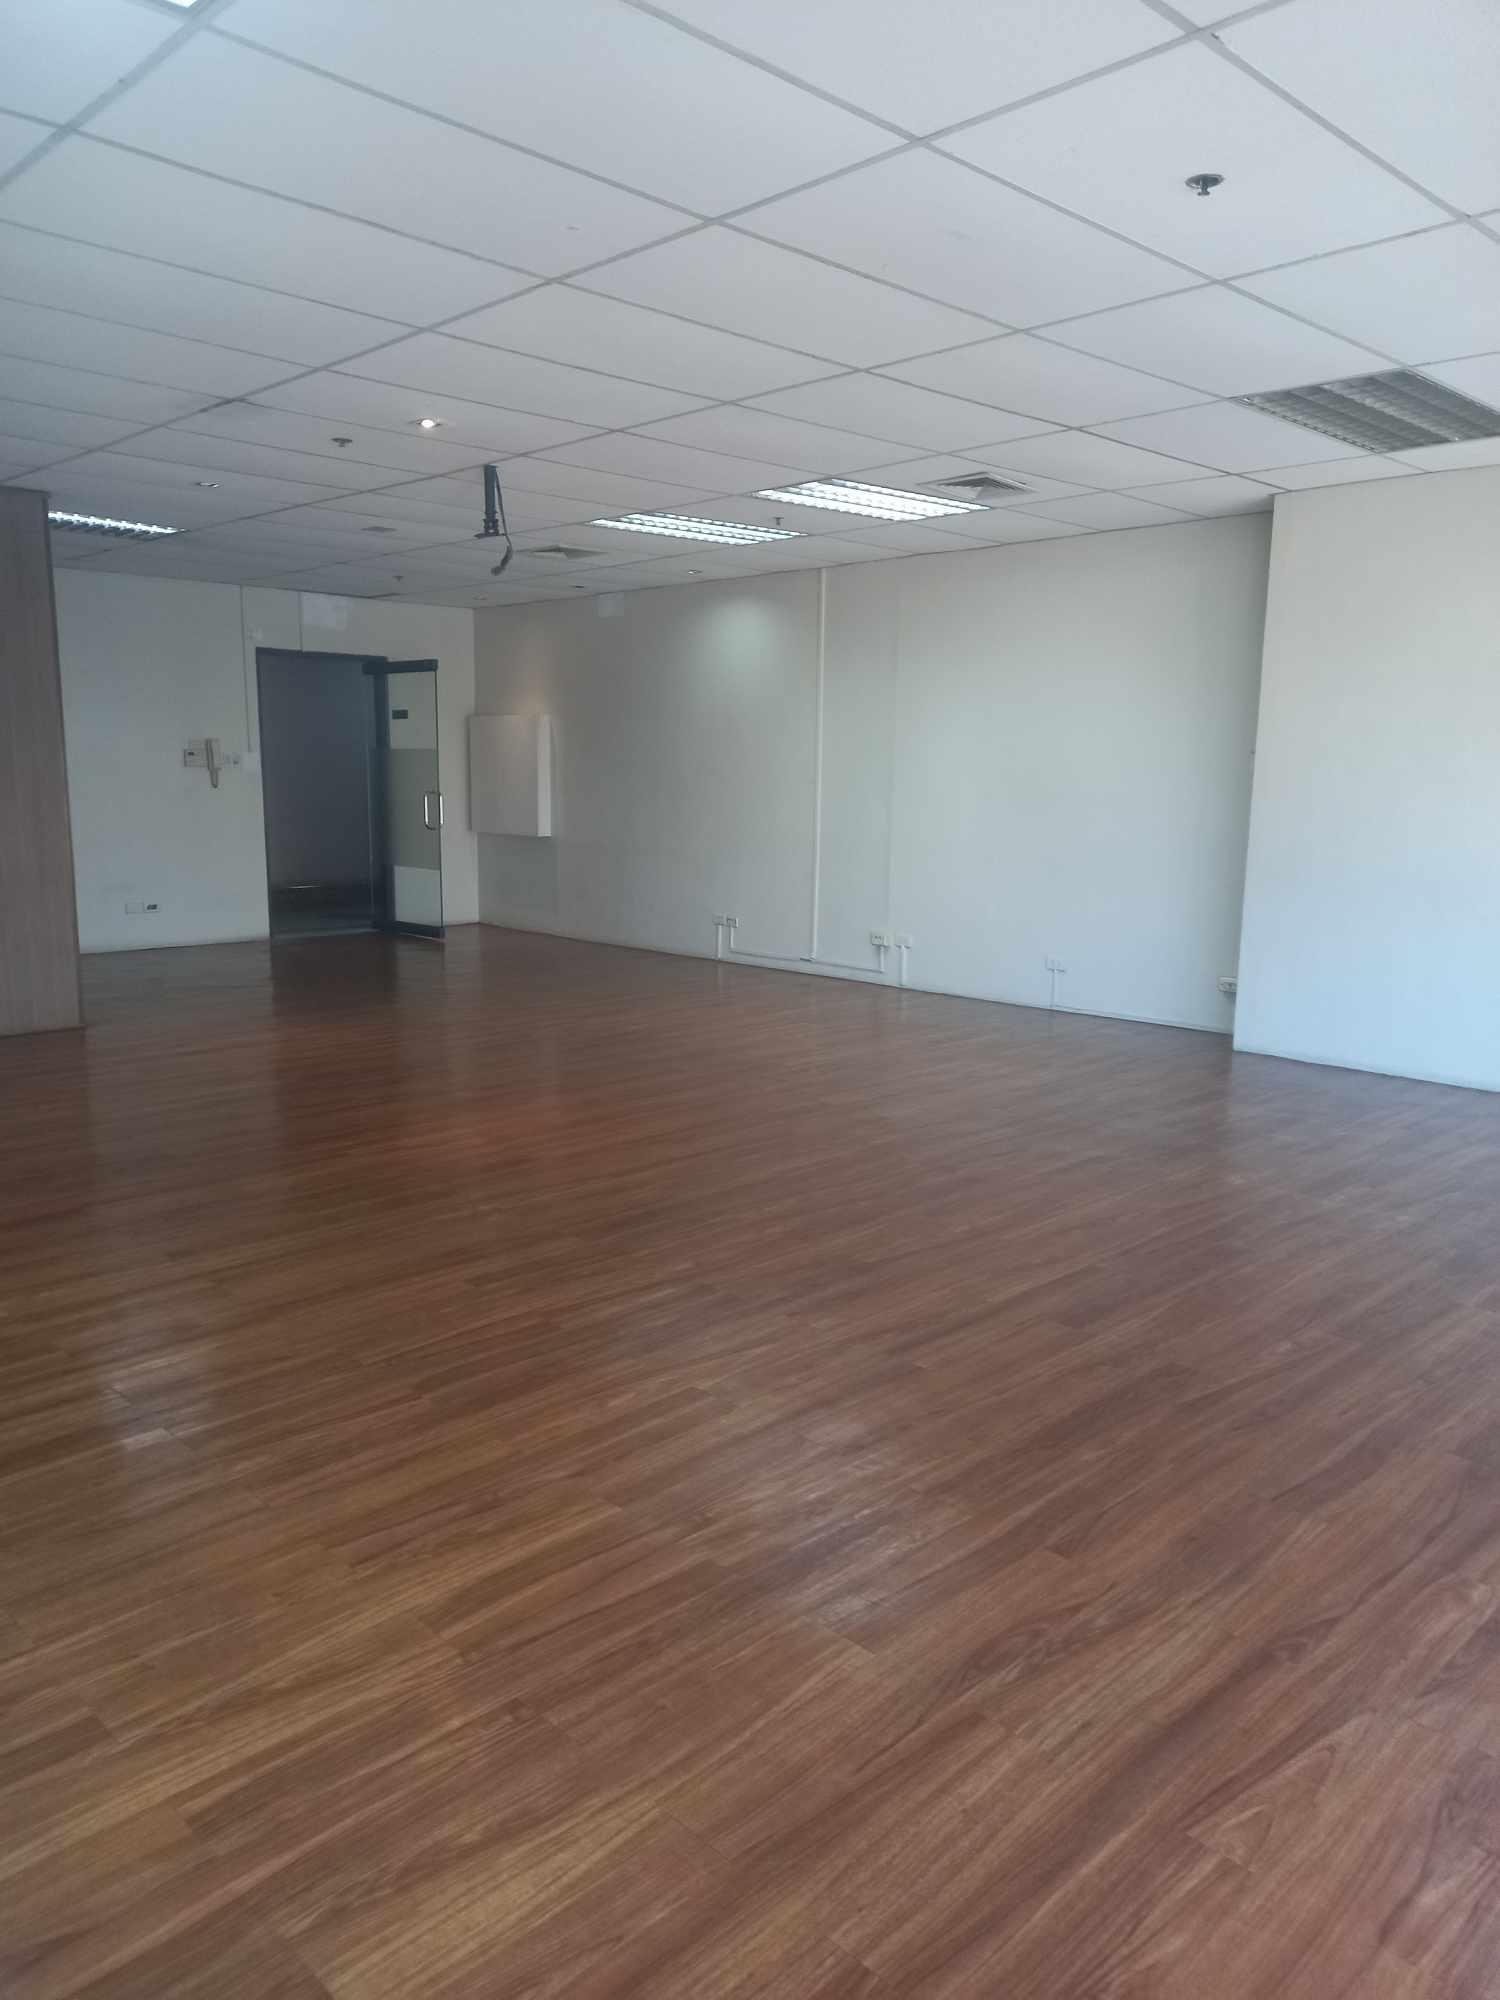 For Rent Lease Fitted 90 sqm Office Space Ortigas Center